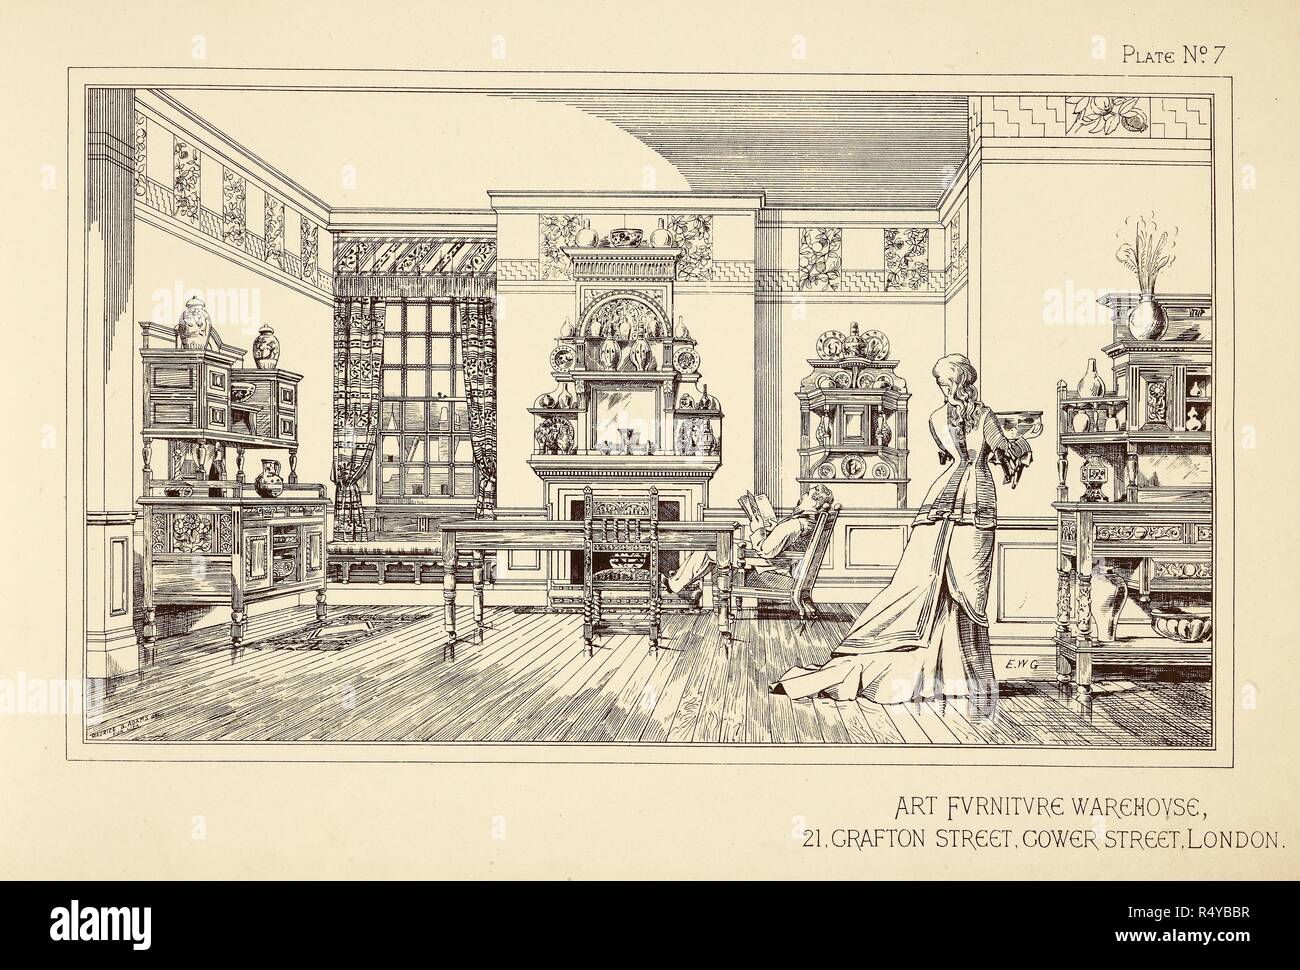 Illustration Of Furniture Warehouse And Objects In A Domestic